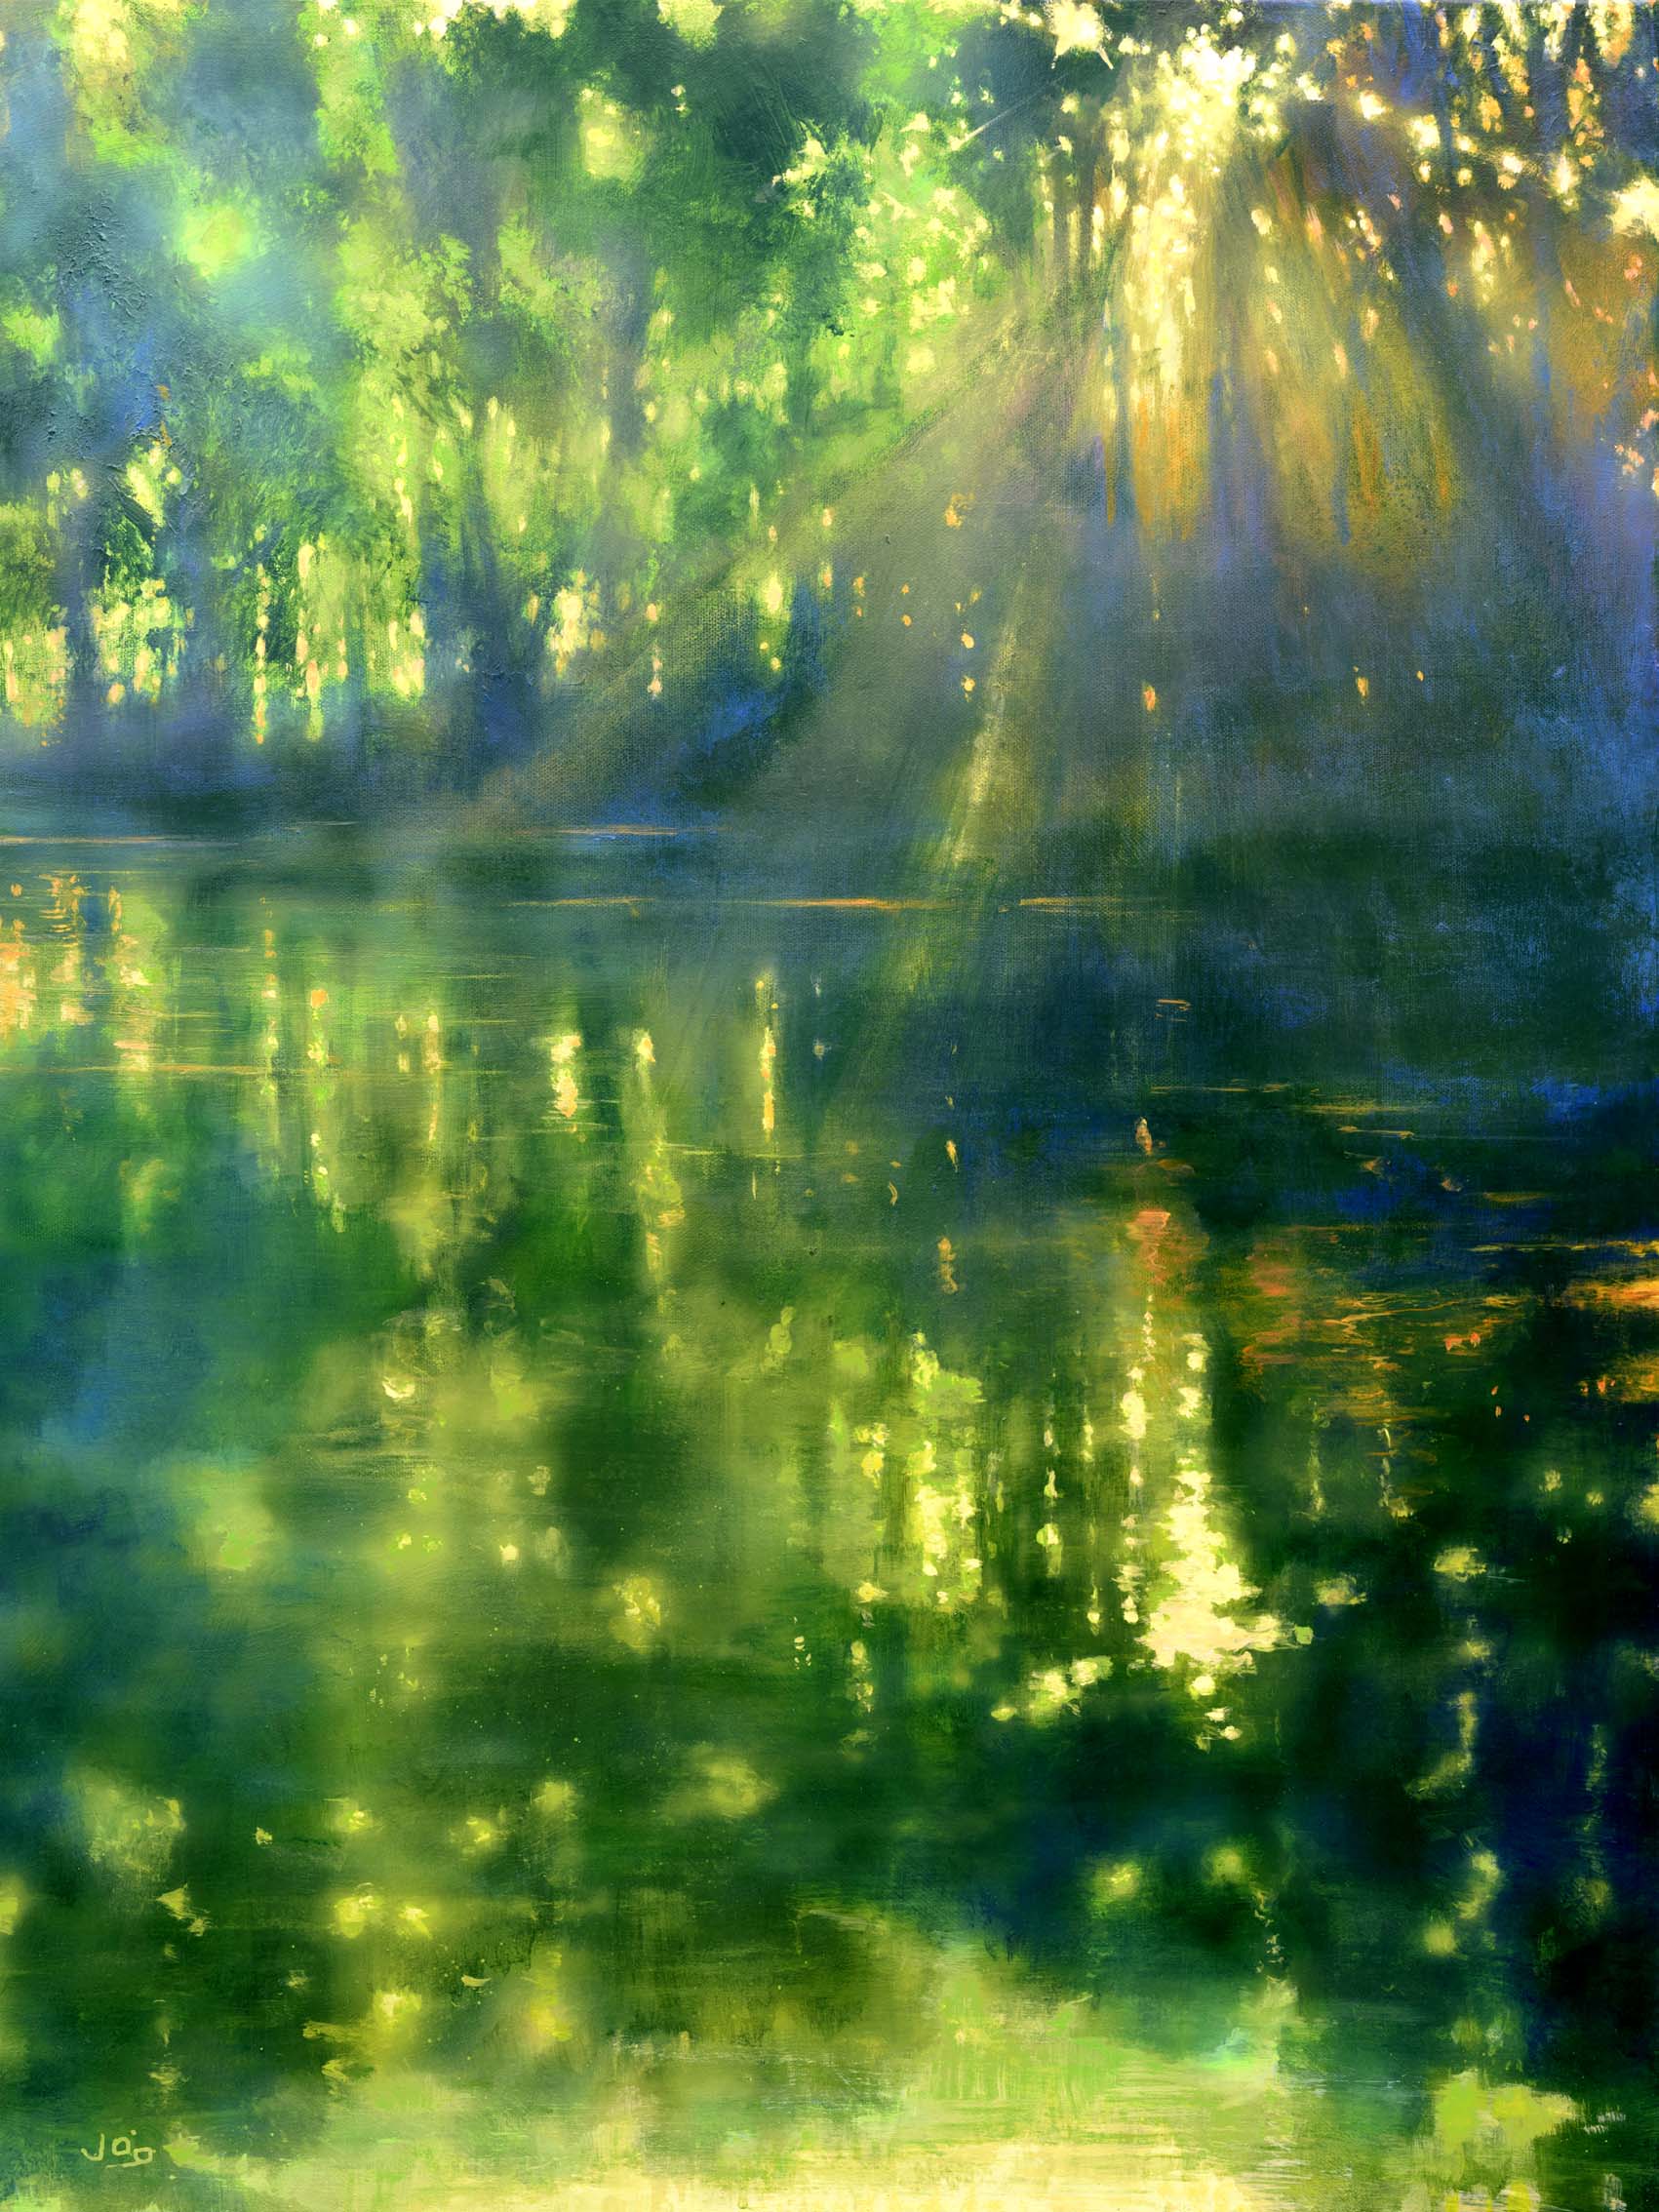 Large river painting, mainly green, with reflections in water and dappled light called On the Banks of the Ouvèze River III by John O'Grady